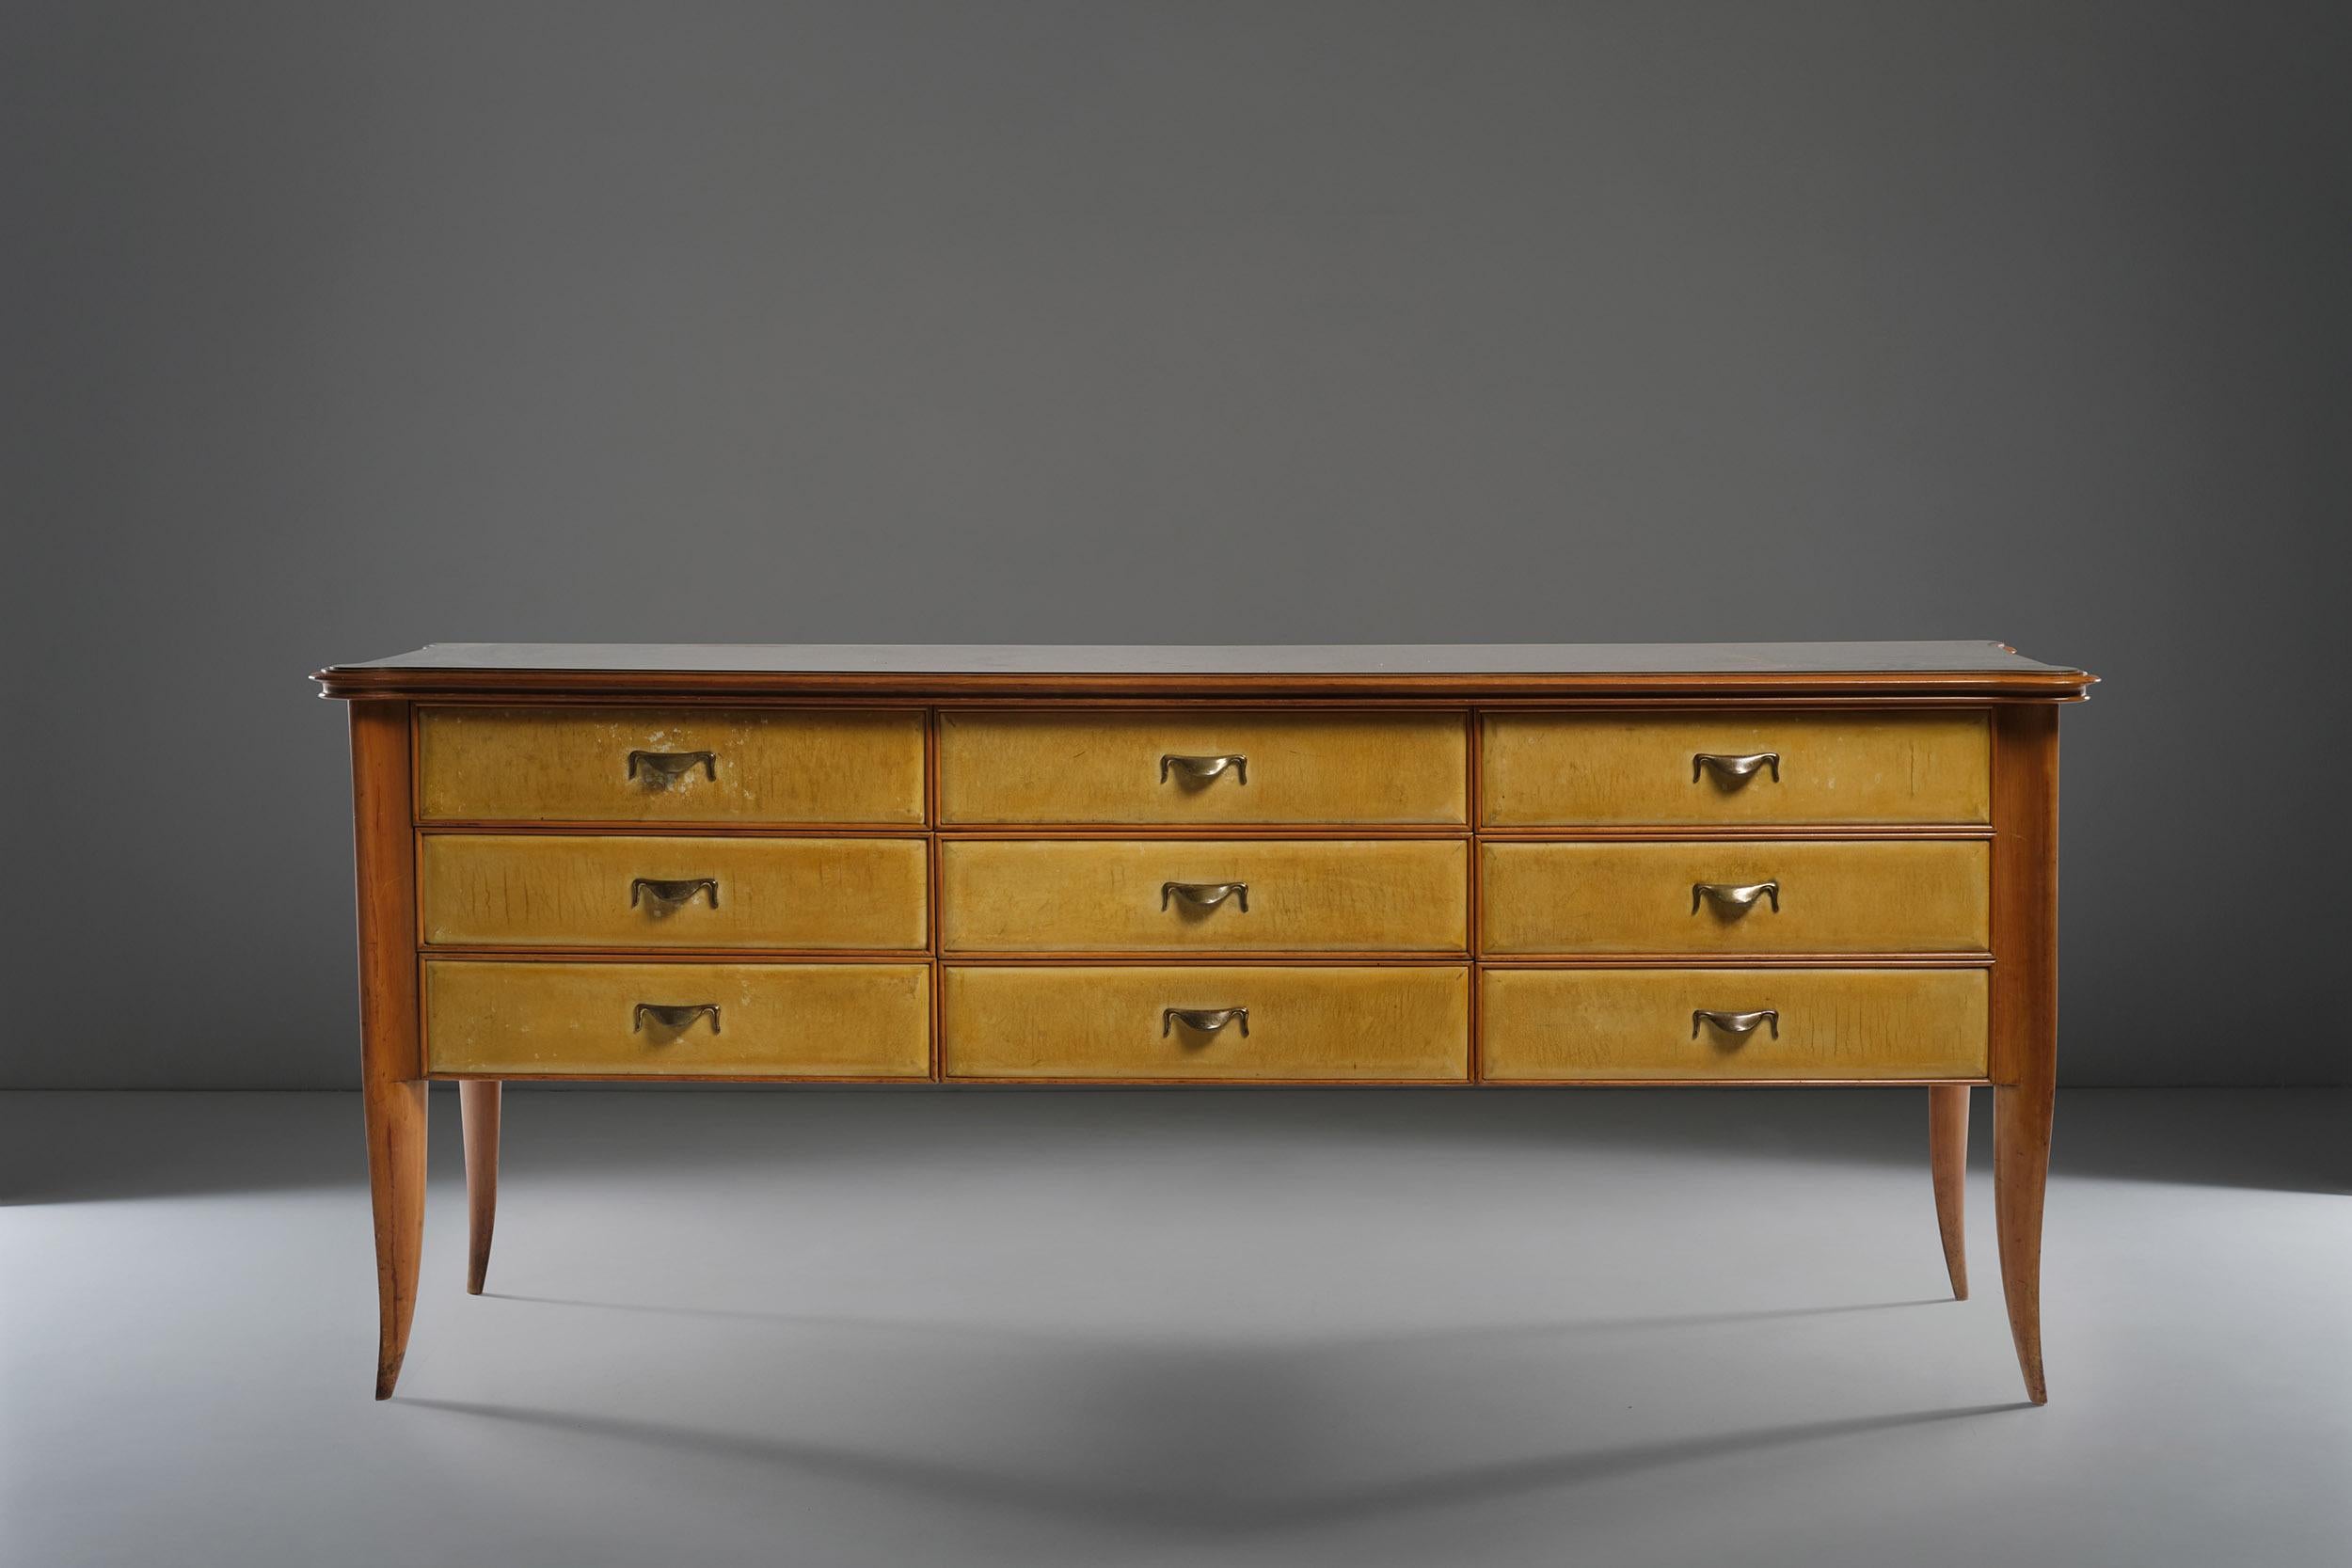 Wonderful Italian sideboard - or chest of drawers - designed by Paolo Buffa in the 1950s. Refined and unmistakably unique piece thanks to its painted glass top, its wooden structure with coated parchment paper and brass handles. The functionality of